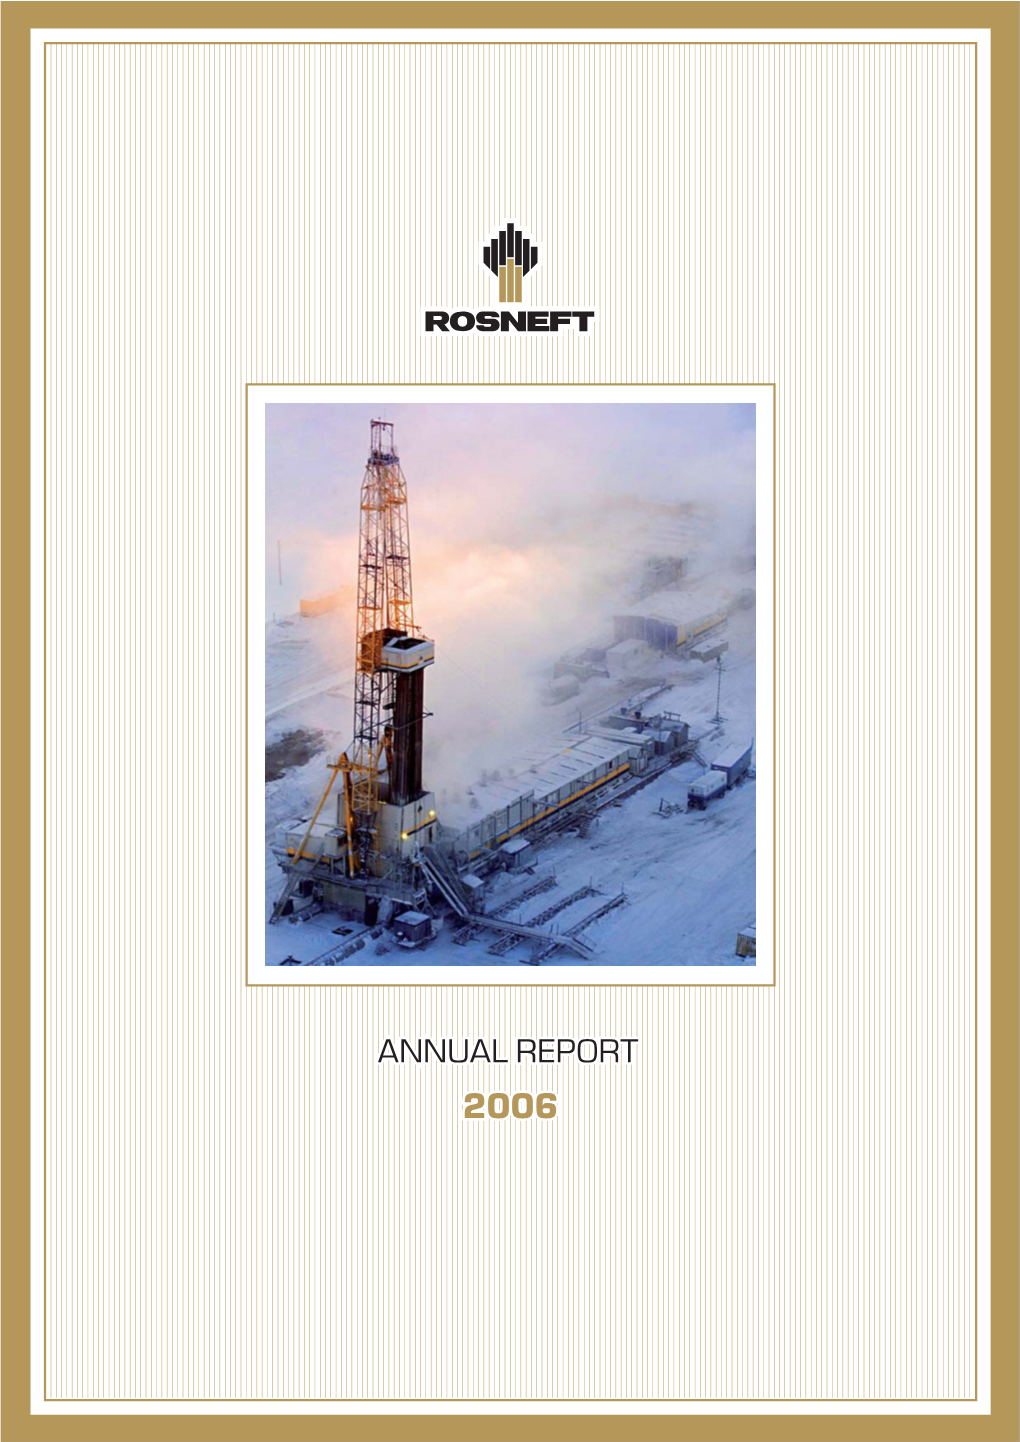 Open Joint Stock Company Rosneft Oil Company 2006 Annual Report